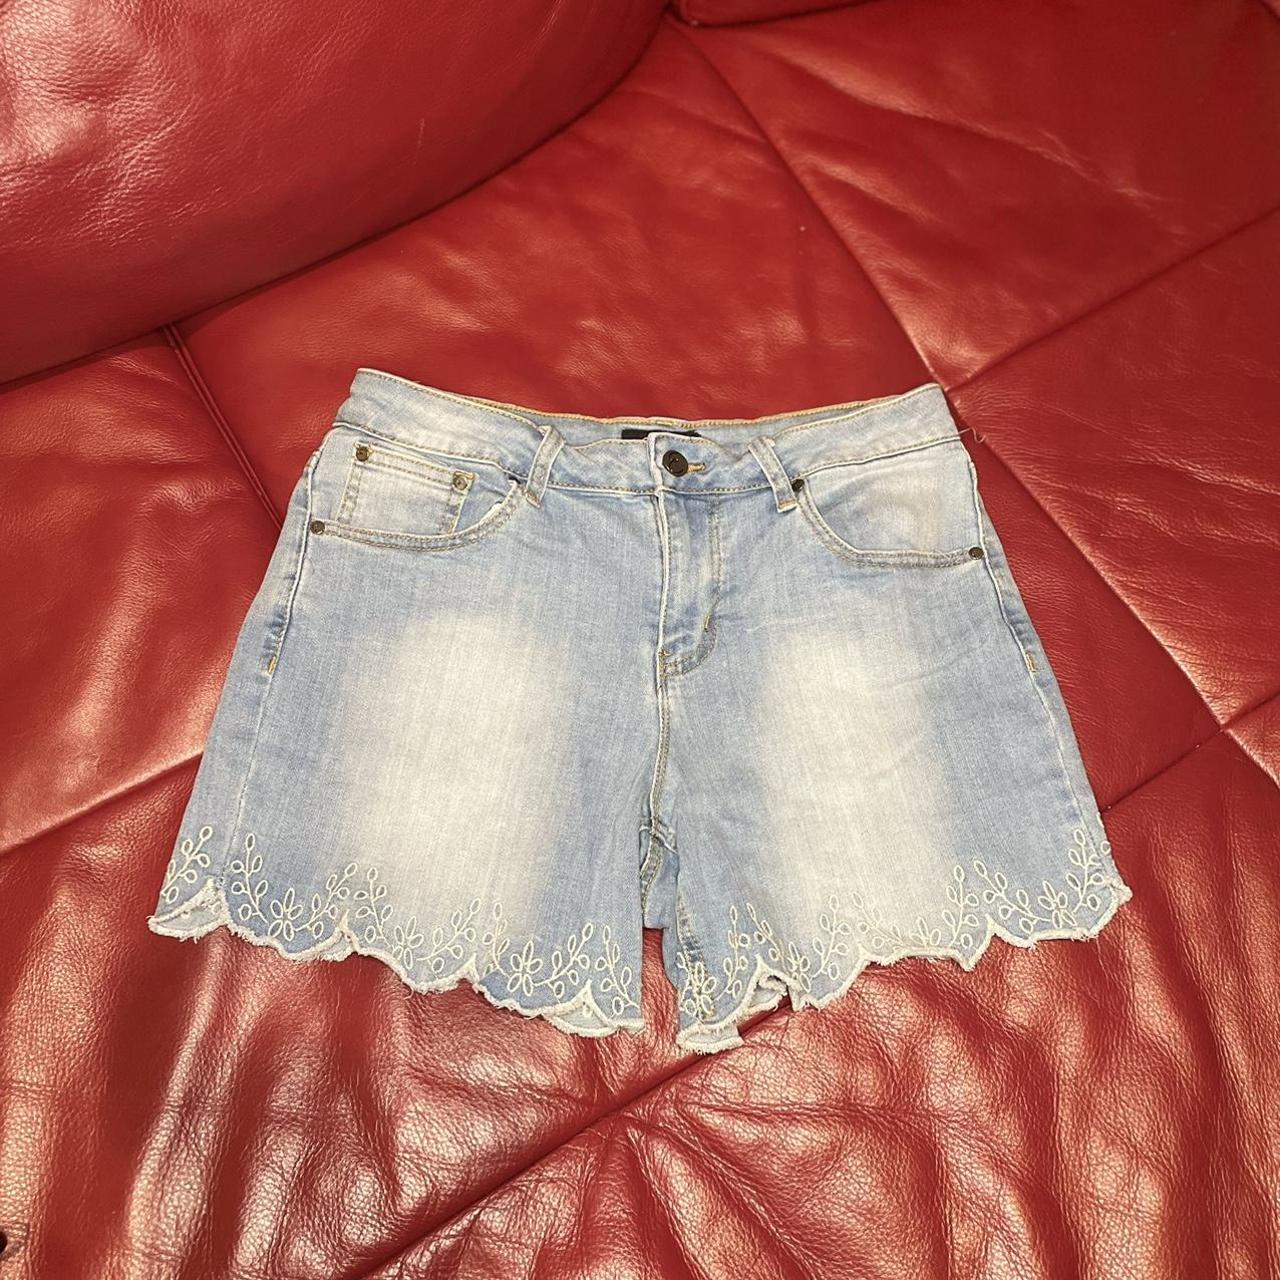 Product Image 3 - High rise jean shorts 💙❤️🌟
.
Size